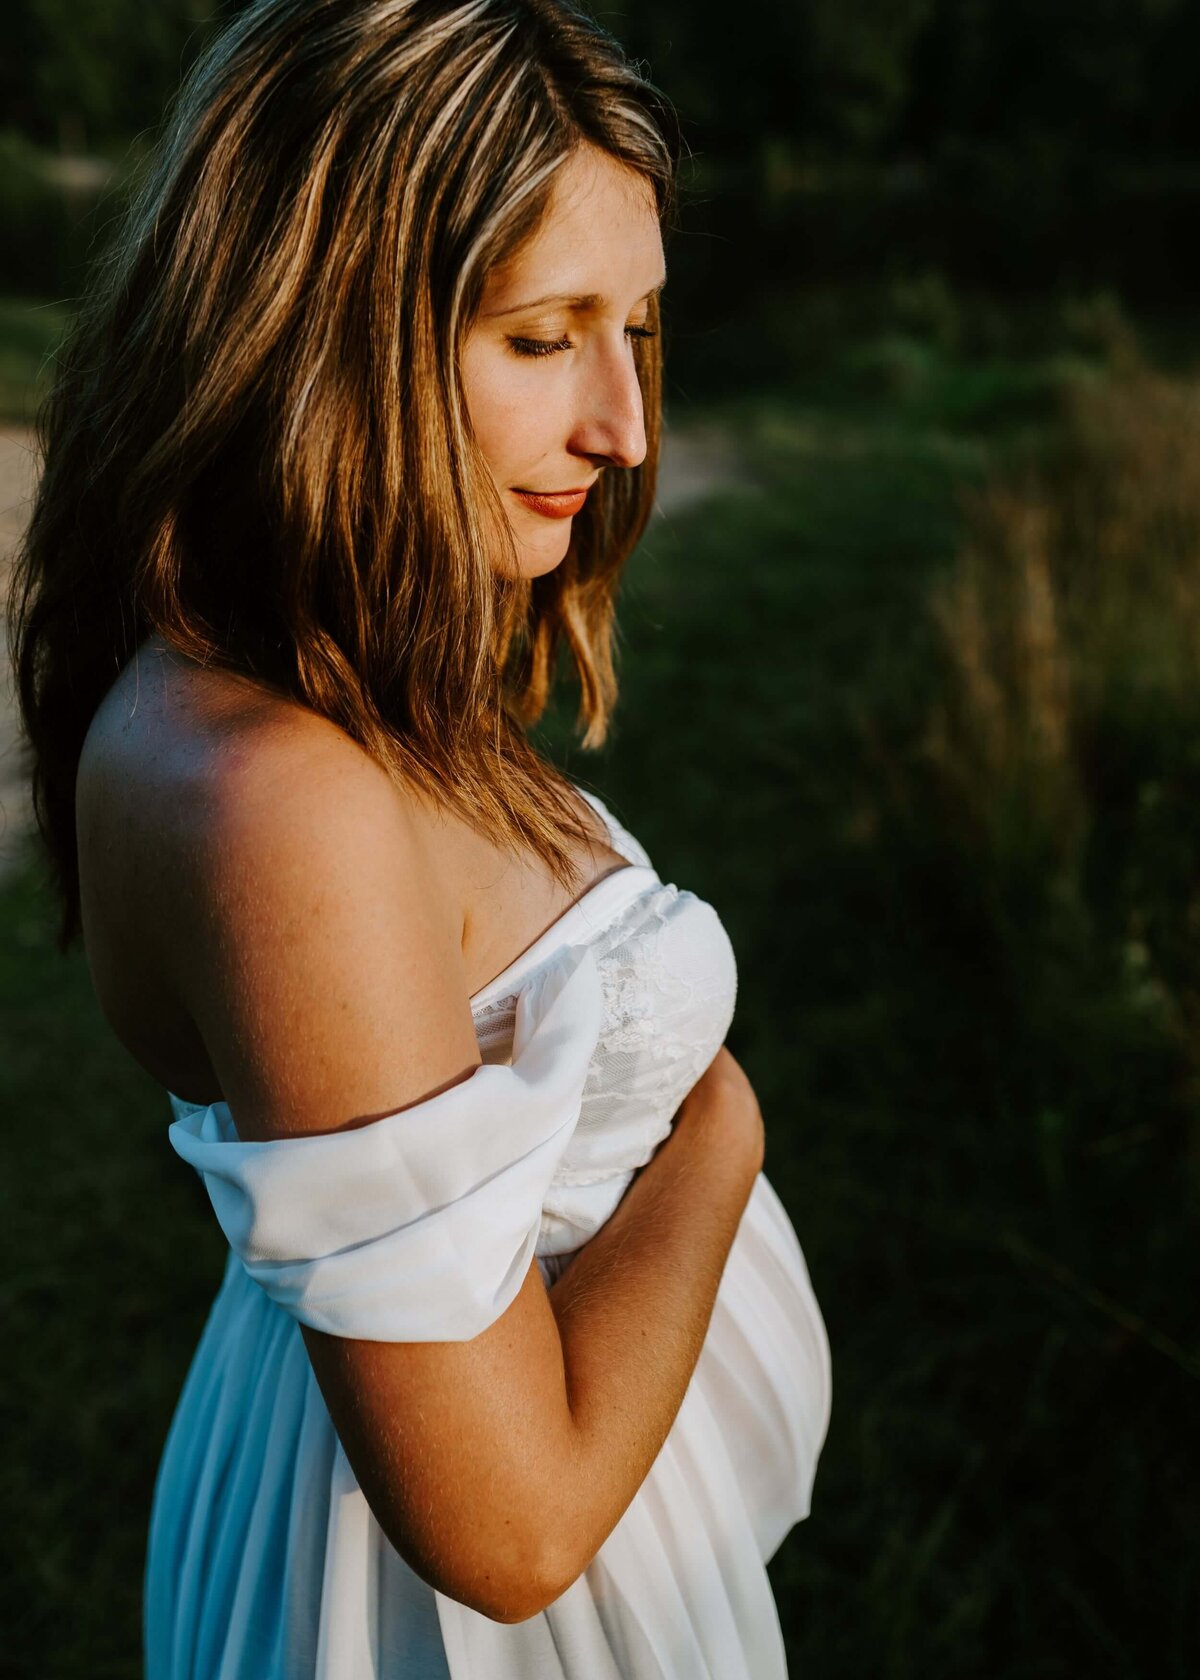 A pregnant woman in a white dress poses elegantly in a field, captured by a Pittsburgh maternity photographer.